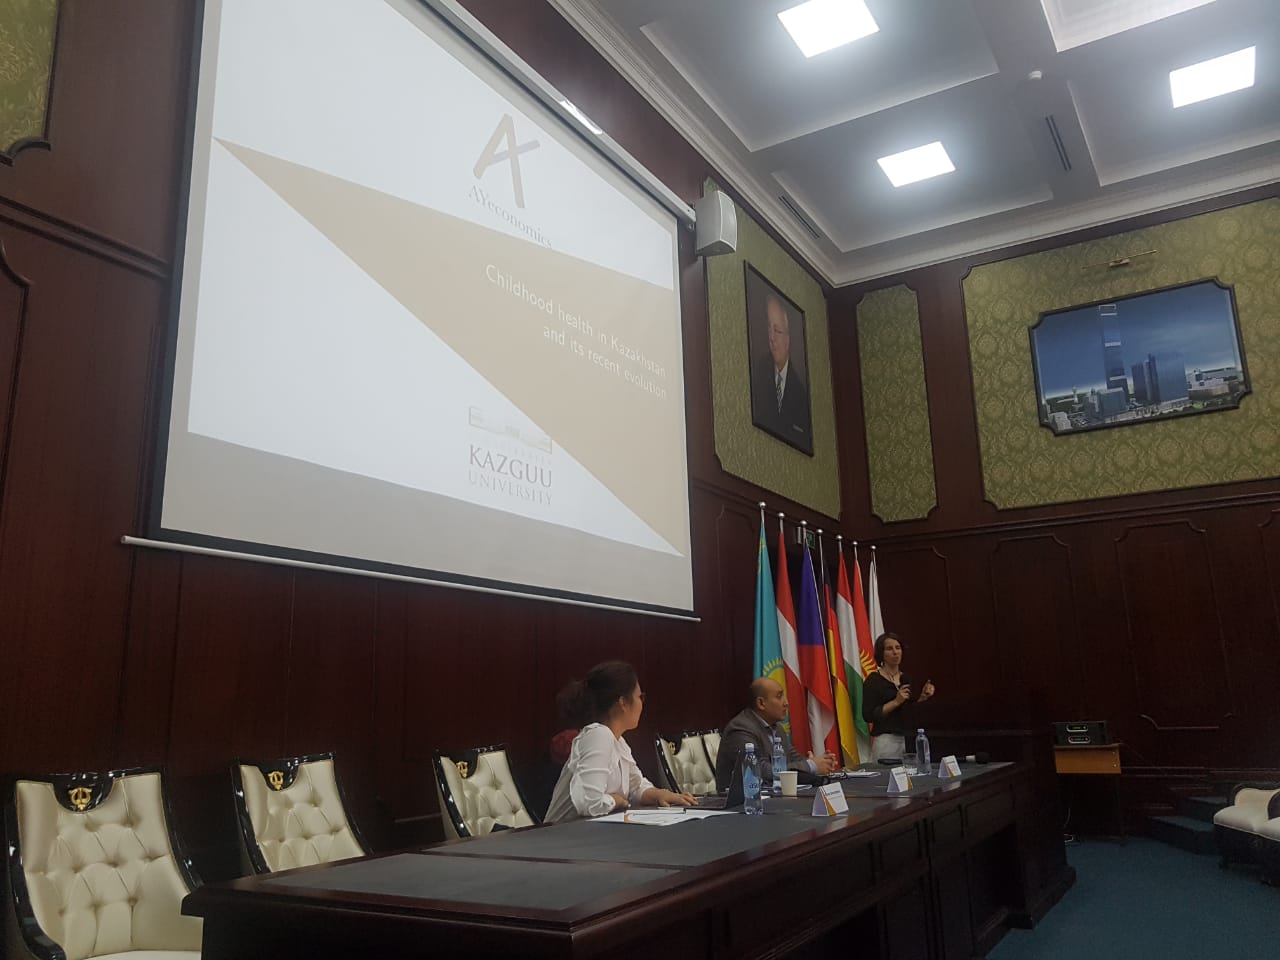 AYeconomics presents the preliminary results of the project “Healthy childhood and socioeconomic status in Kazahstan” in Astana (September 2018)